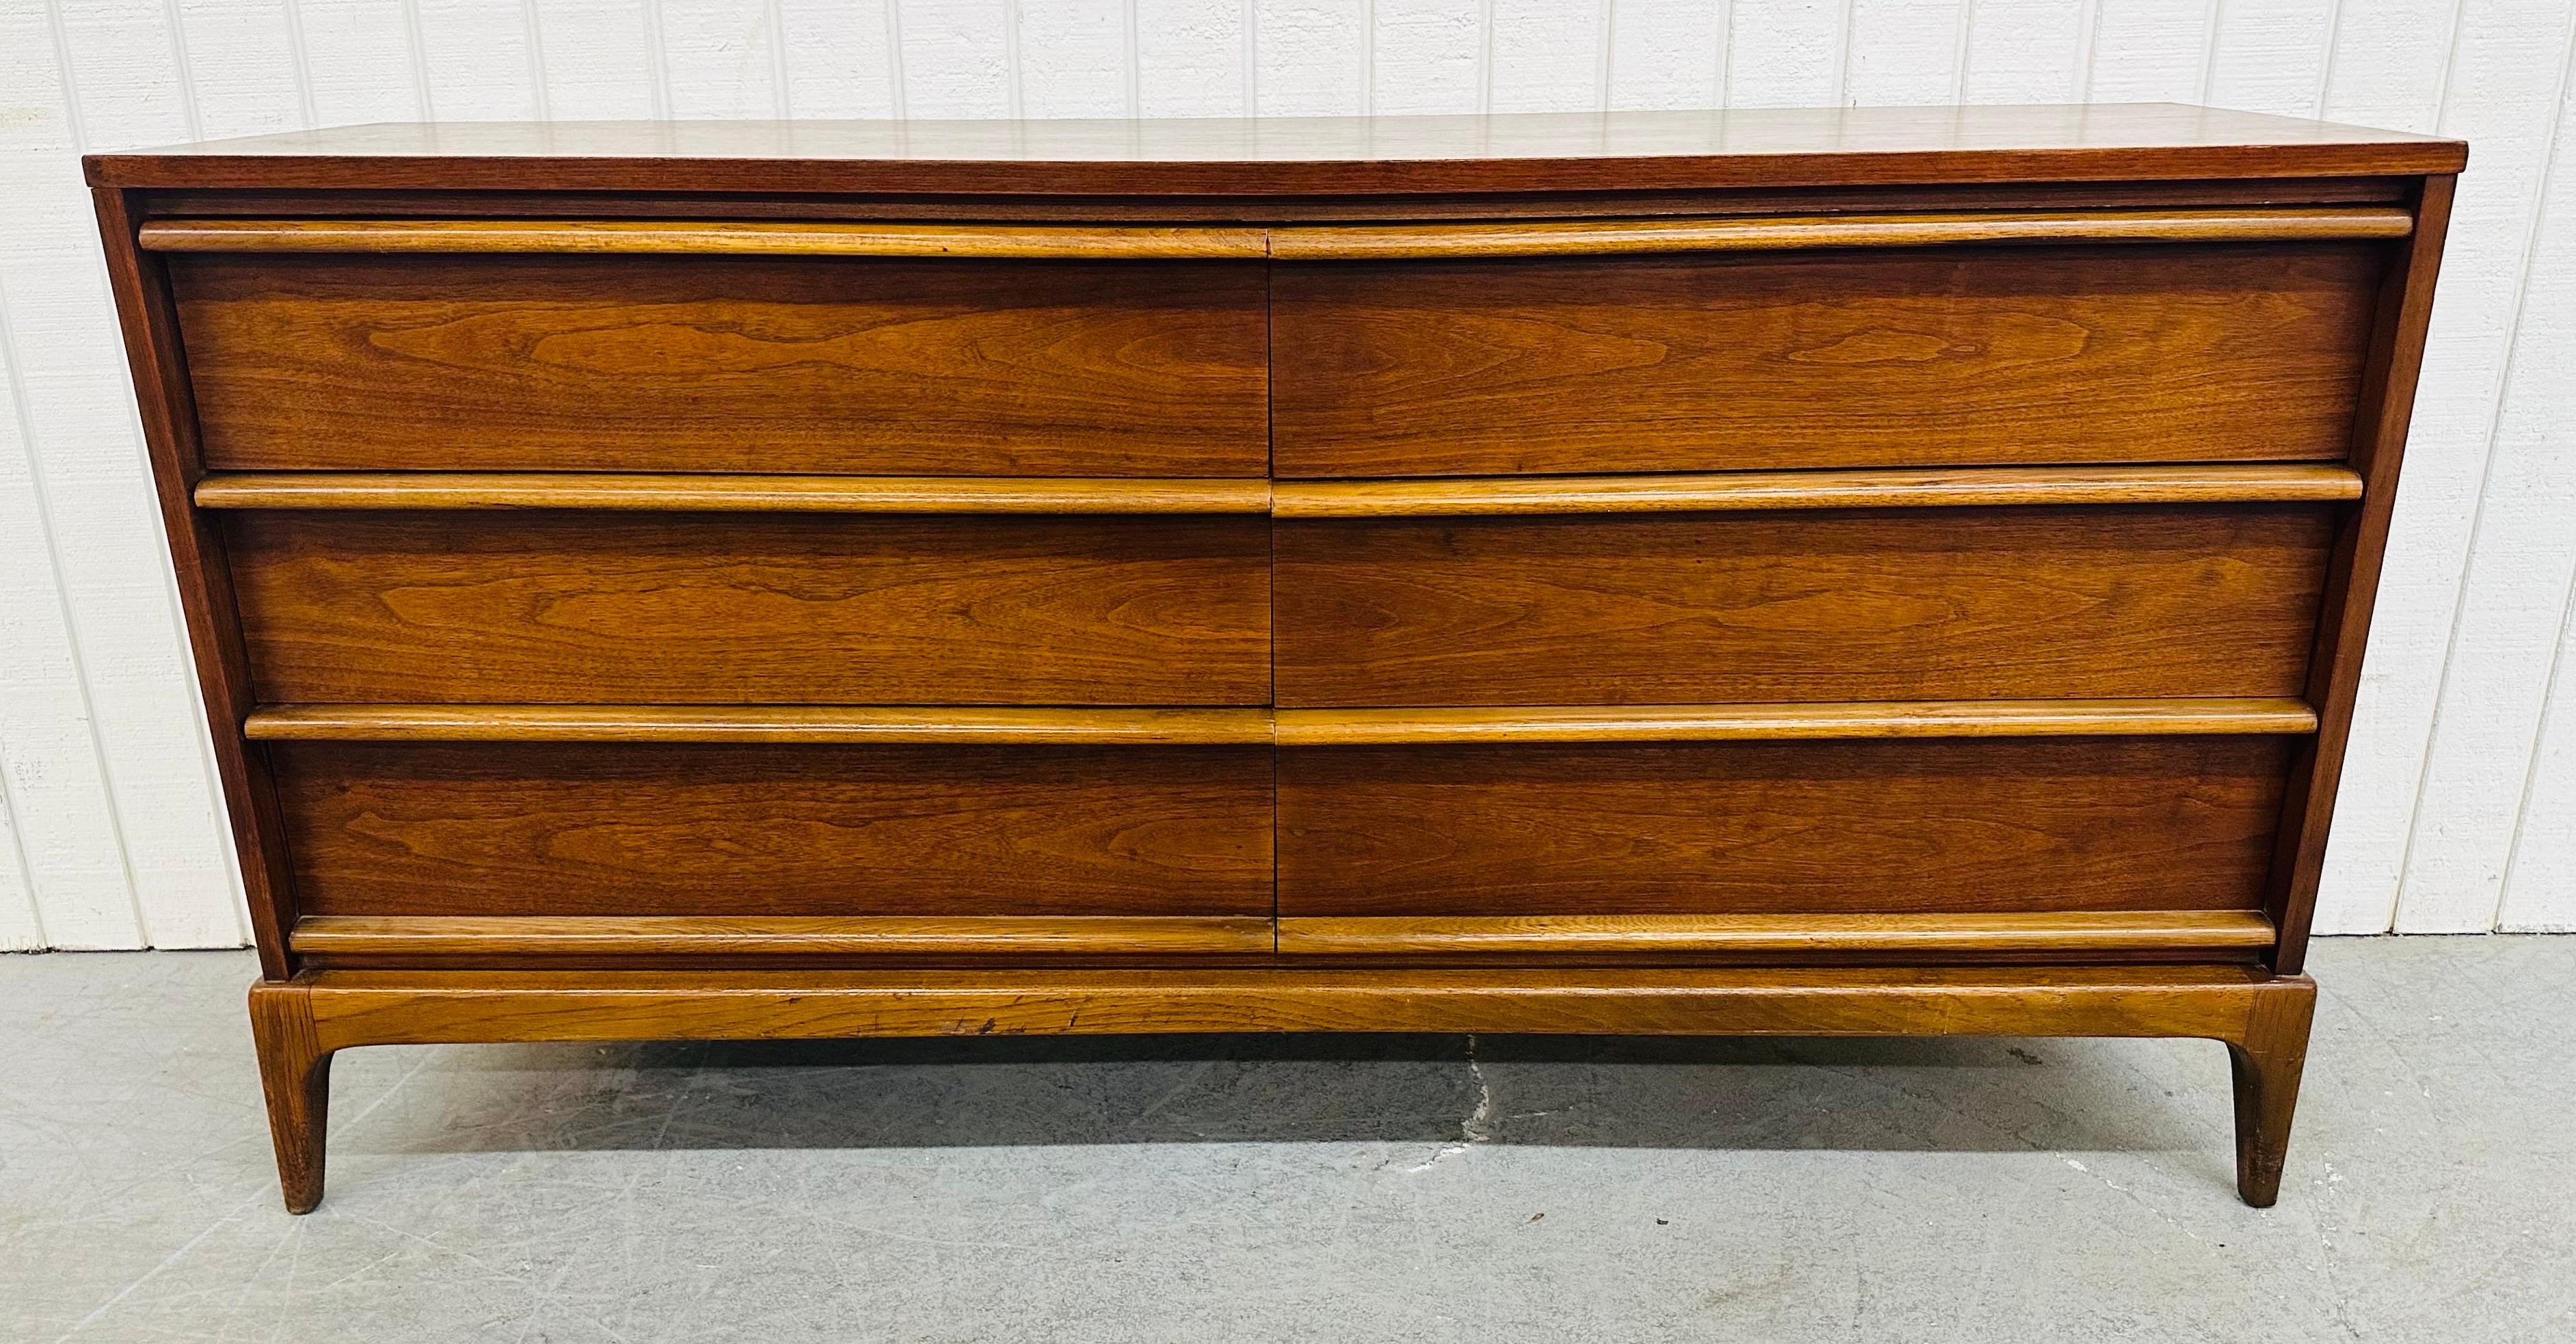 This listing is for a Mid-Century Modern Lane Rhythm Walnut Dresser. Featuring a straight line design, six drawers for storage, and a beautiful walnut finish. This is an exceptional combination of quality and design by Lane!